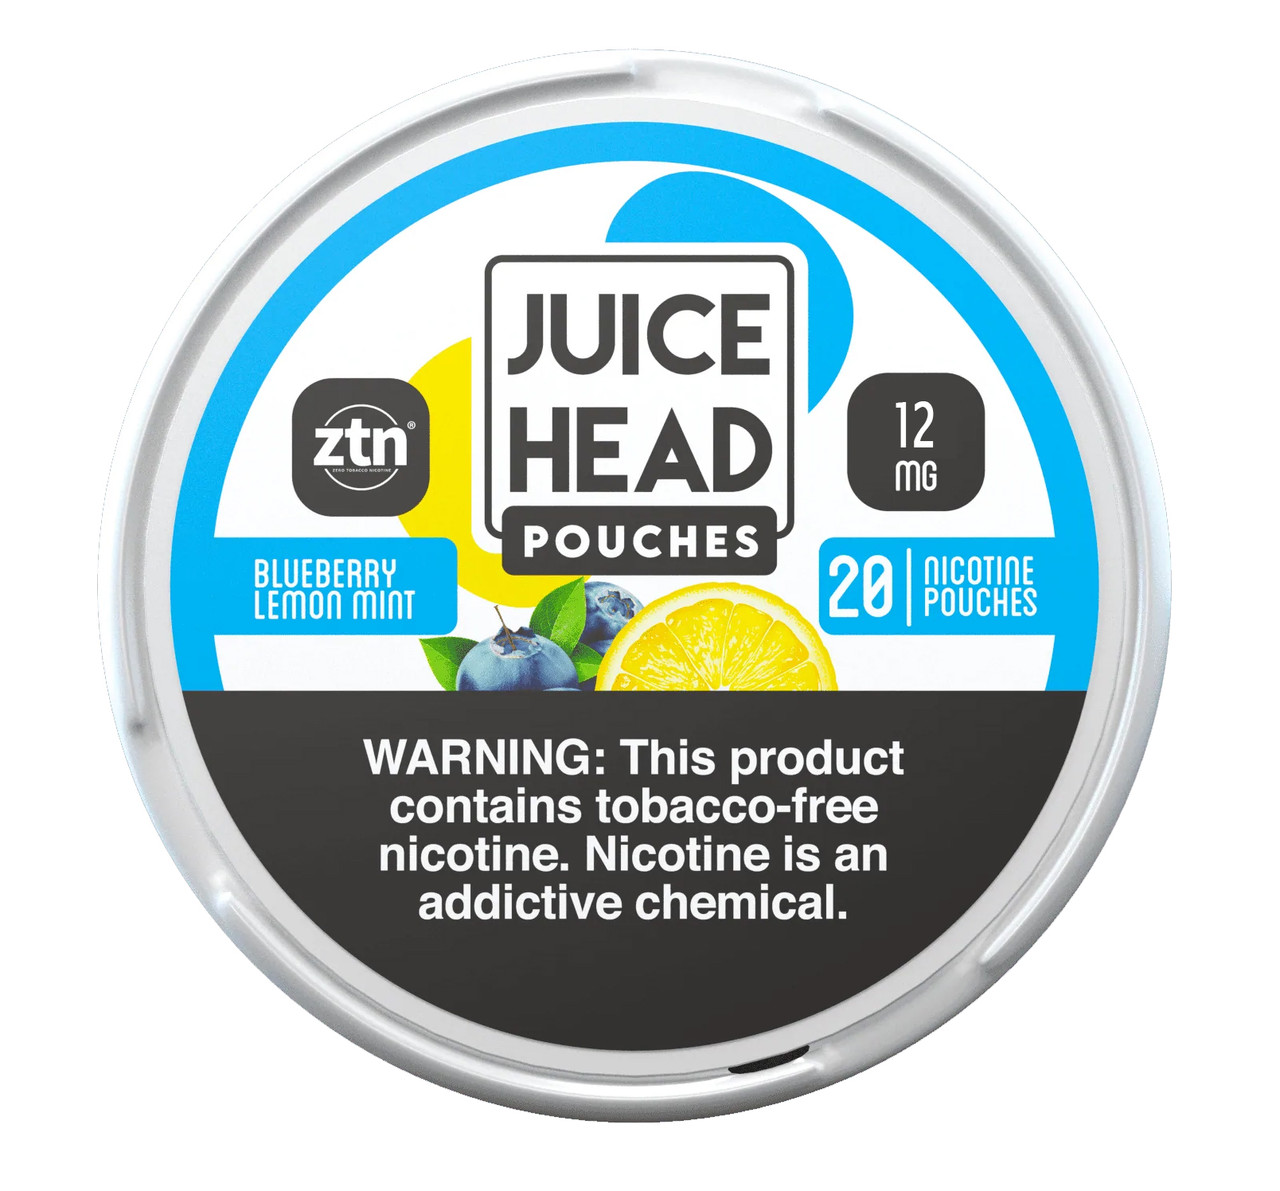 Juice Head Tobacco Free Nicotine 12MG Pouches - 1 Can Blueberry Lemon Mint